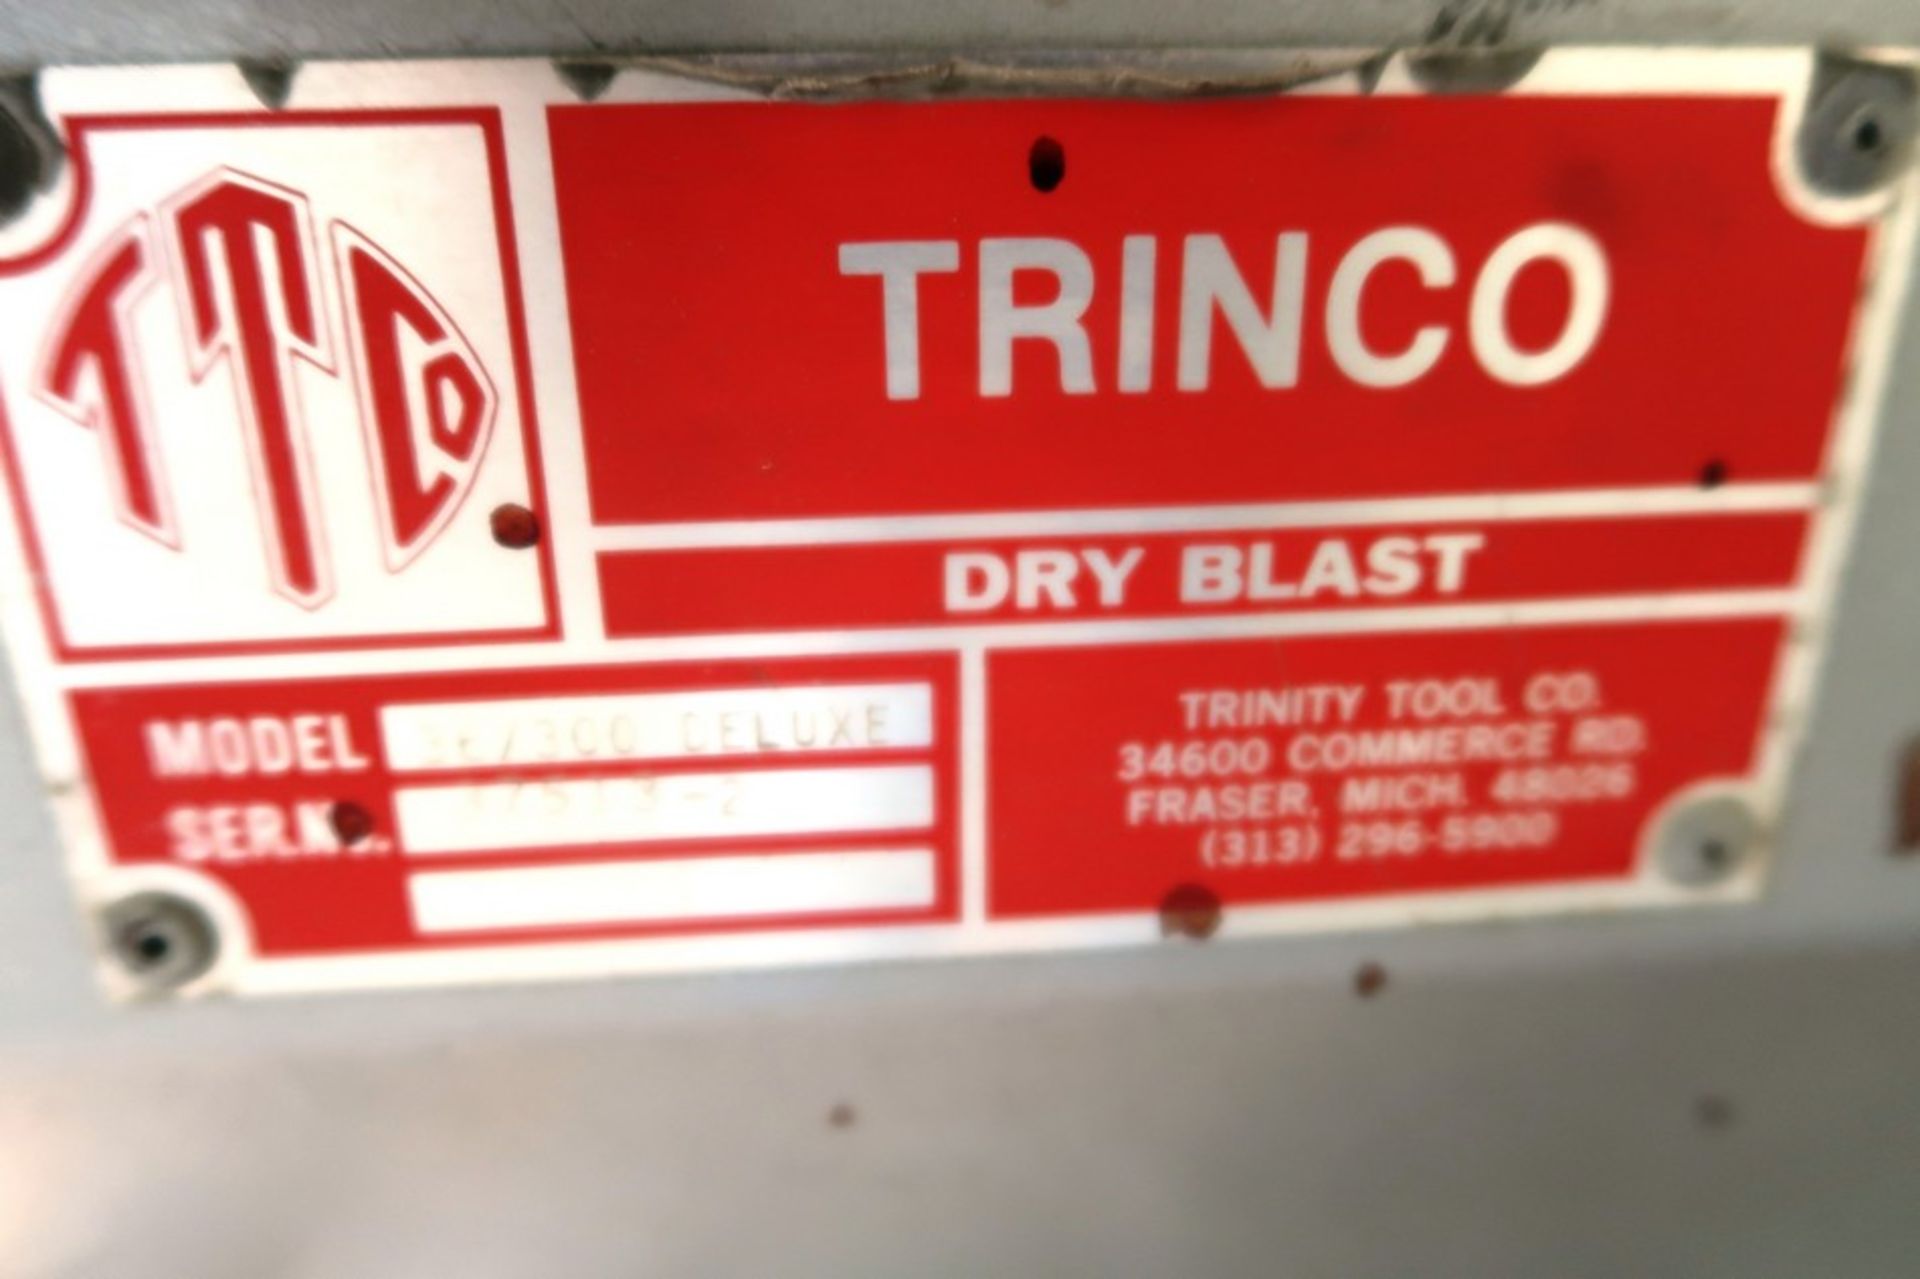 Trinco Dry Blast Booth Model 36/300 Deluxe, S/N 37513-2 - Image 2 of 3